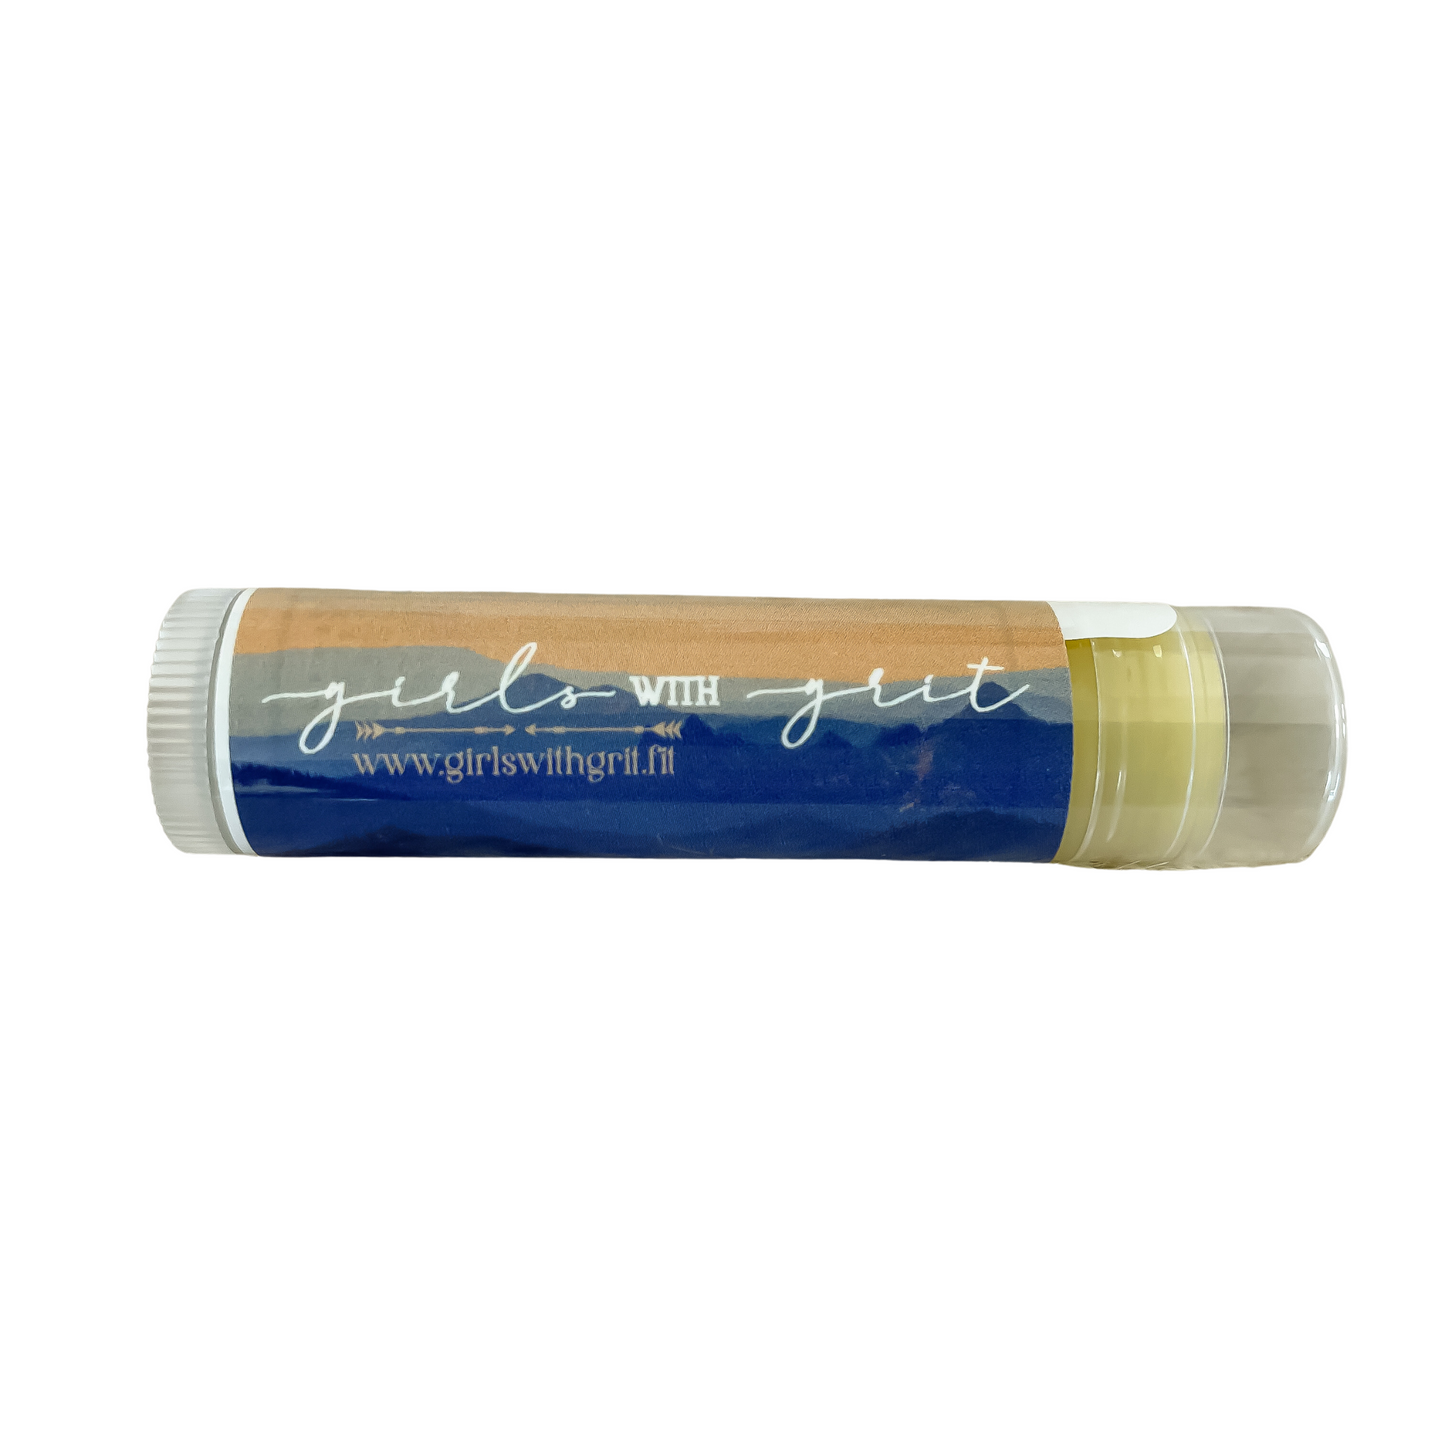 Girls with Grit All Natural SPF 30 Vanilla Lip Balm